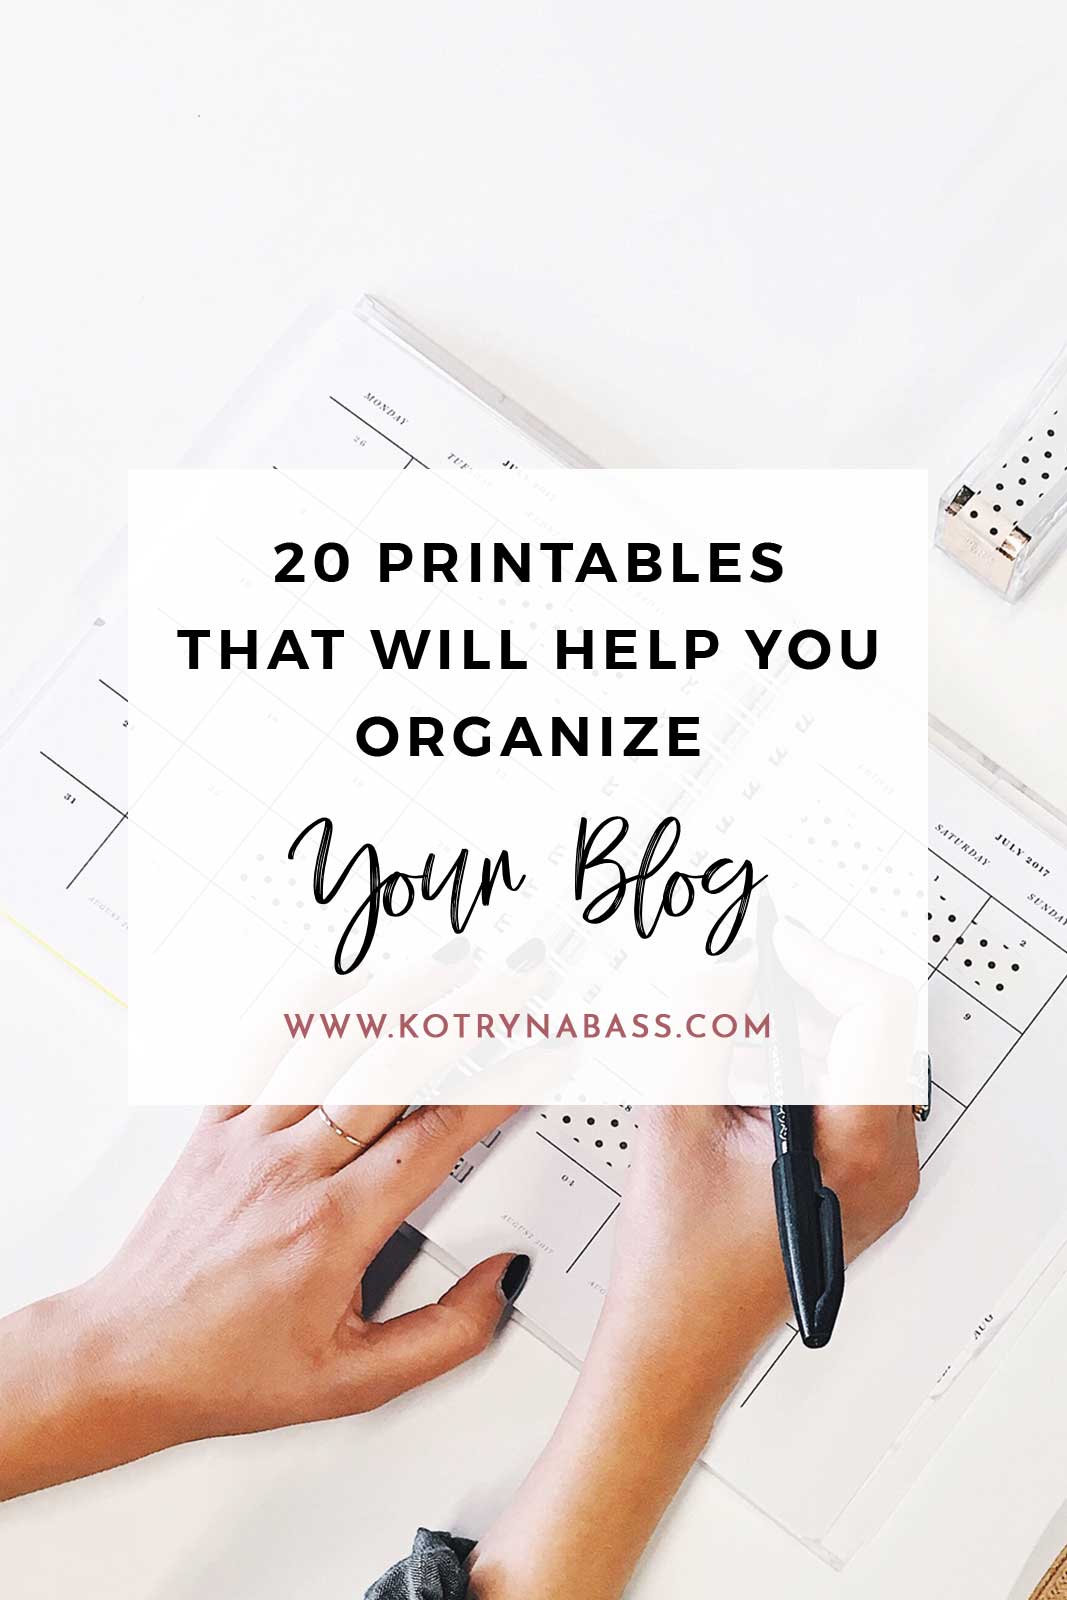 Sometimes, managing your blog can be a hustle. With all the invoicing, social media tracking, stats and content planning it is easy to feel lost. Luckily, there are plenty of useful printables for bloggers that can help you put your work & life in ord